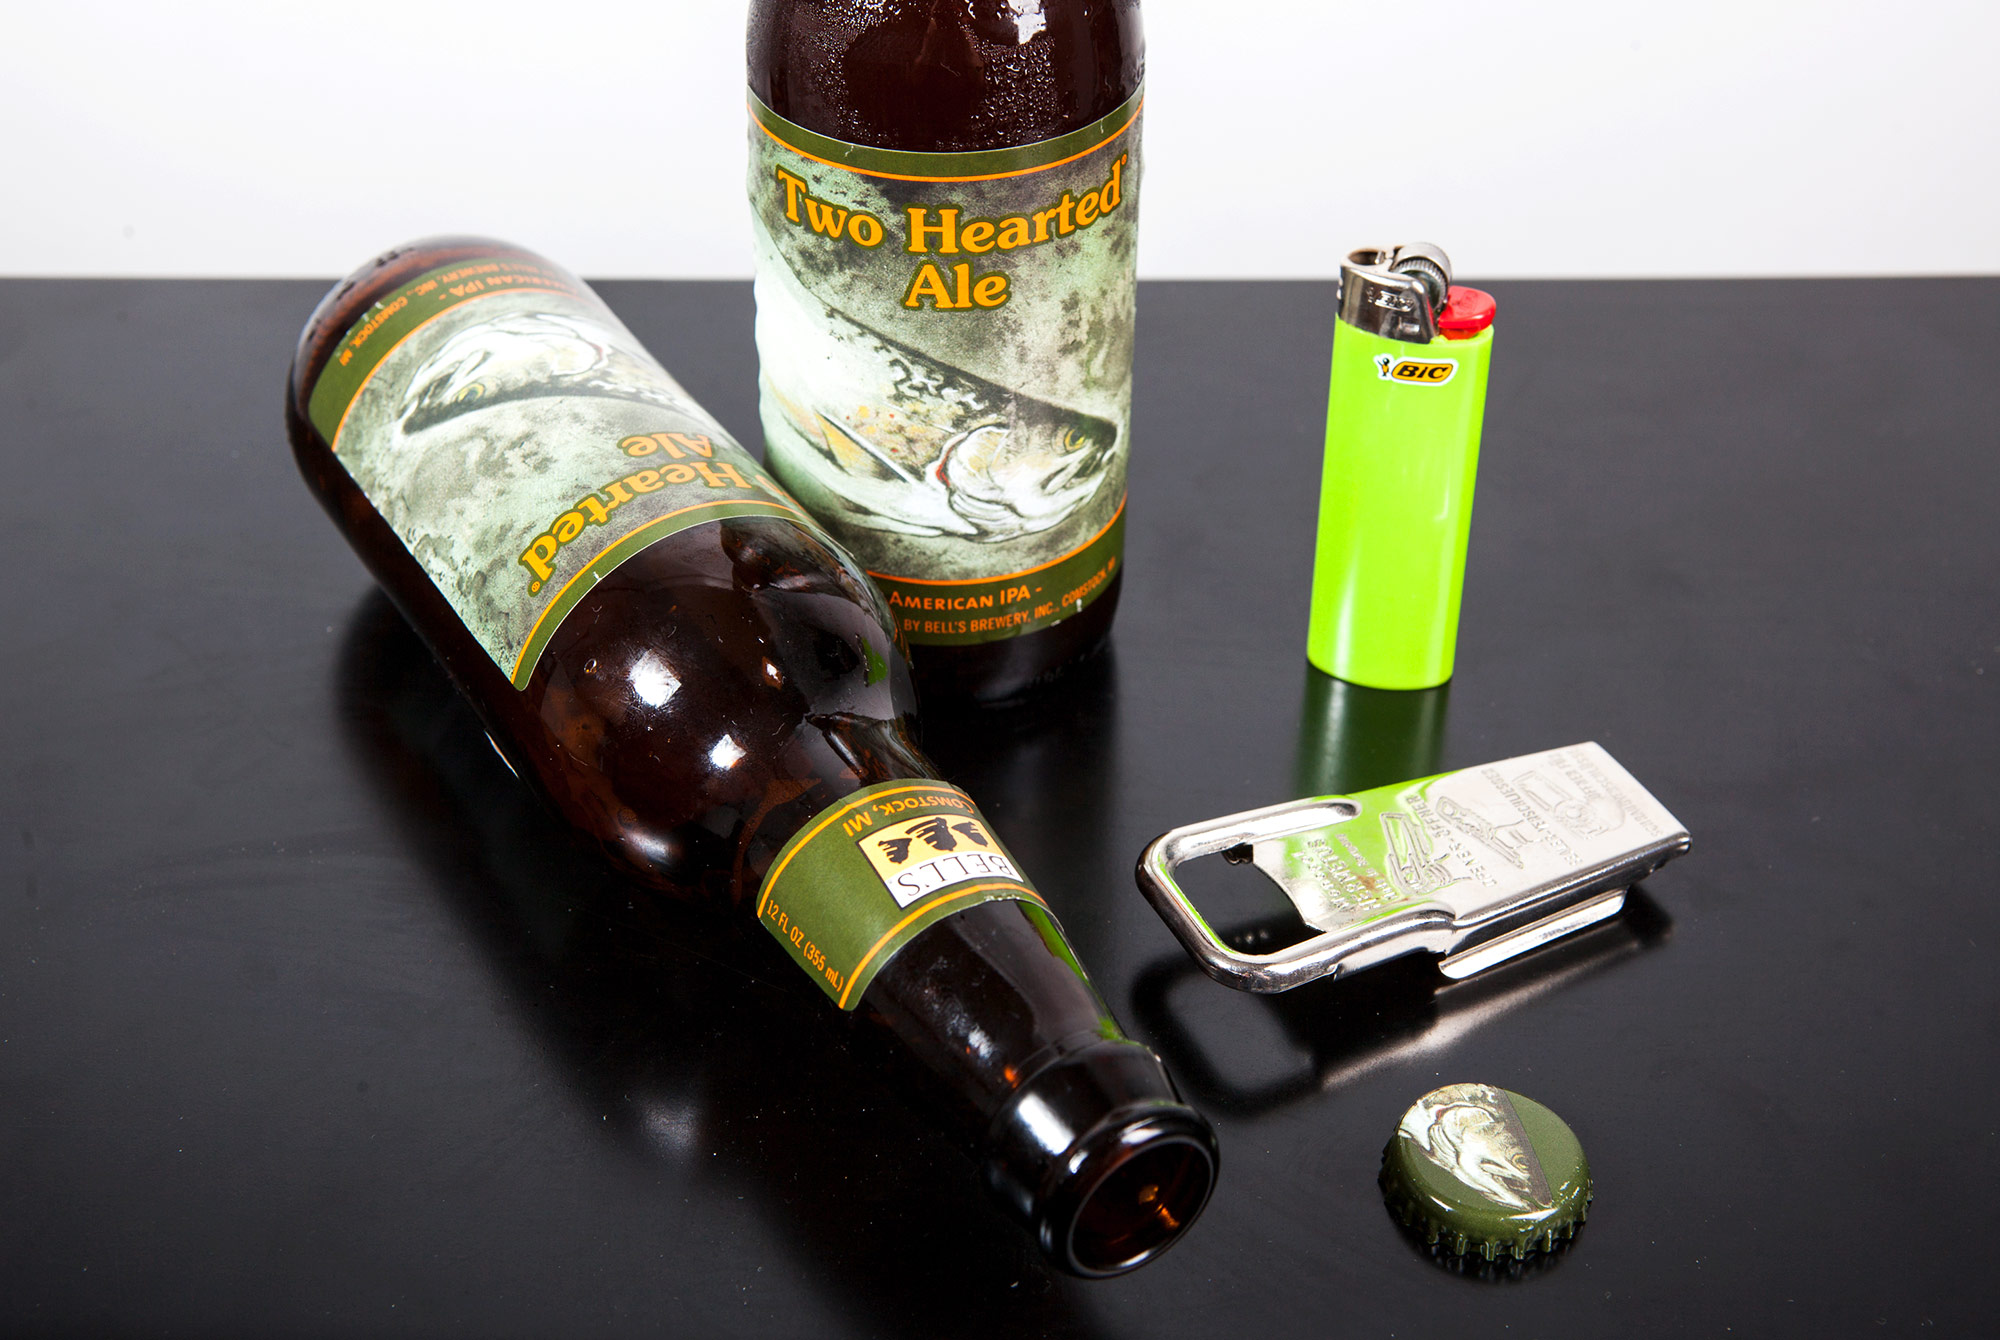 How to Open a Beer Bottle With Just About Anything